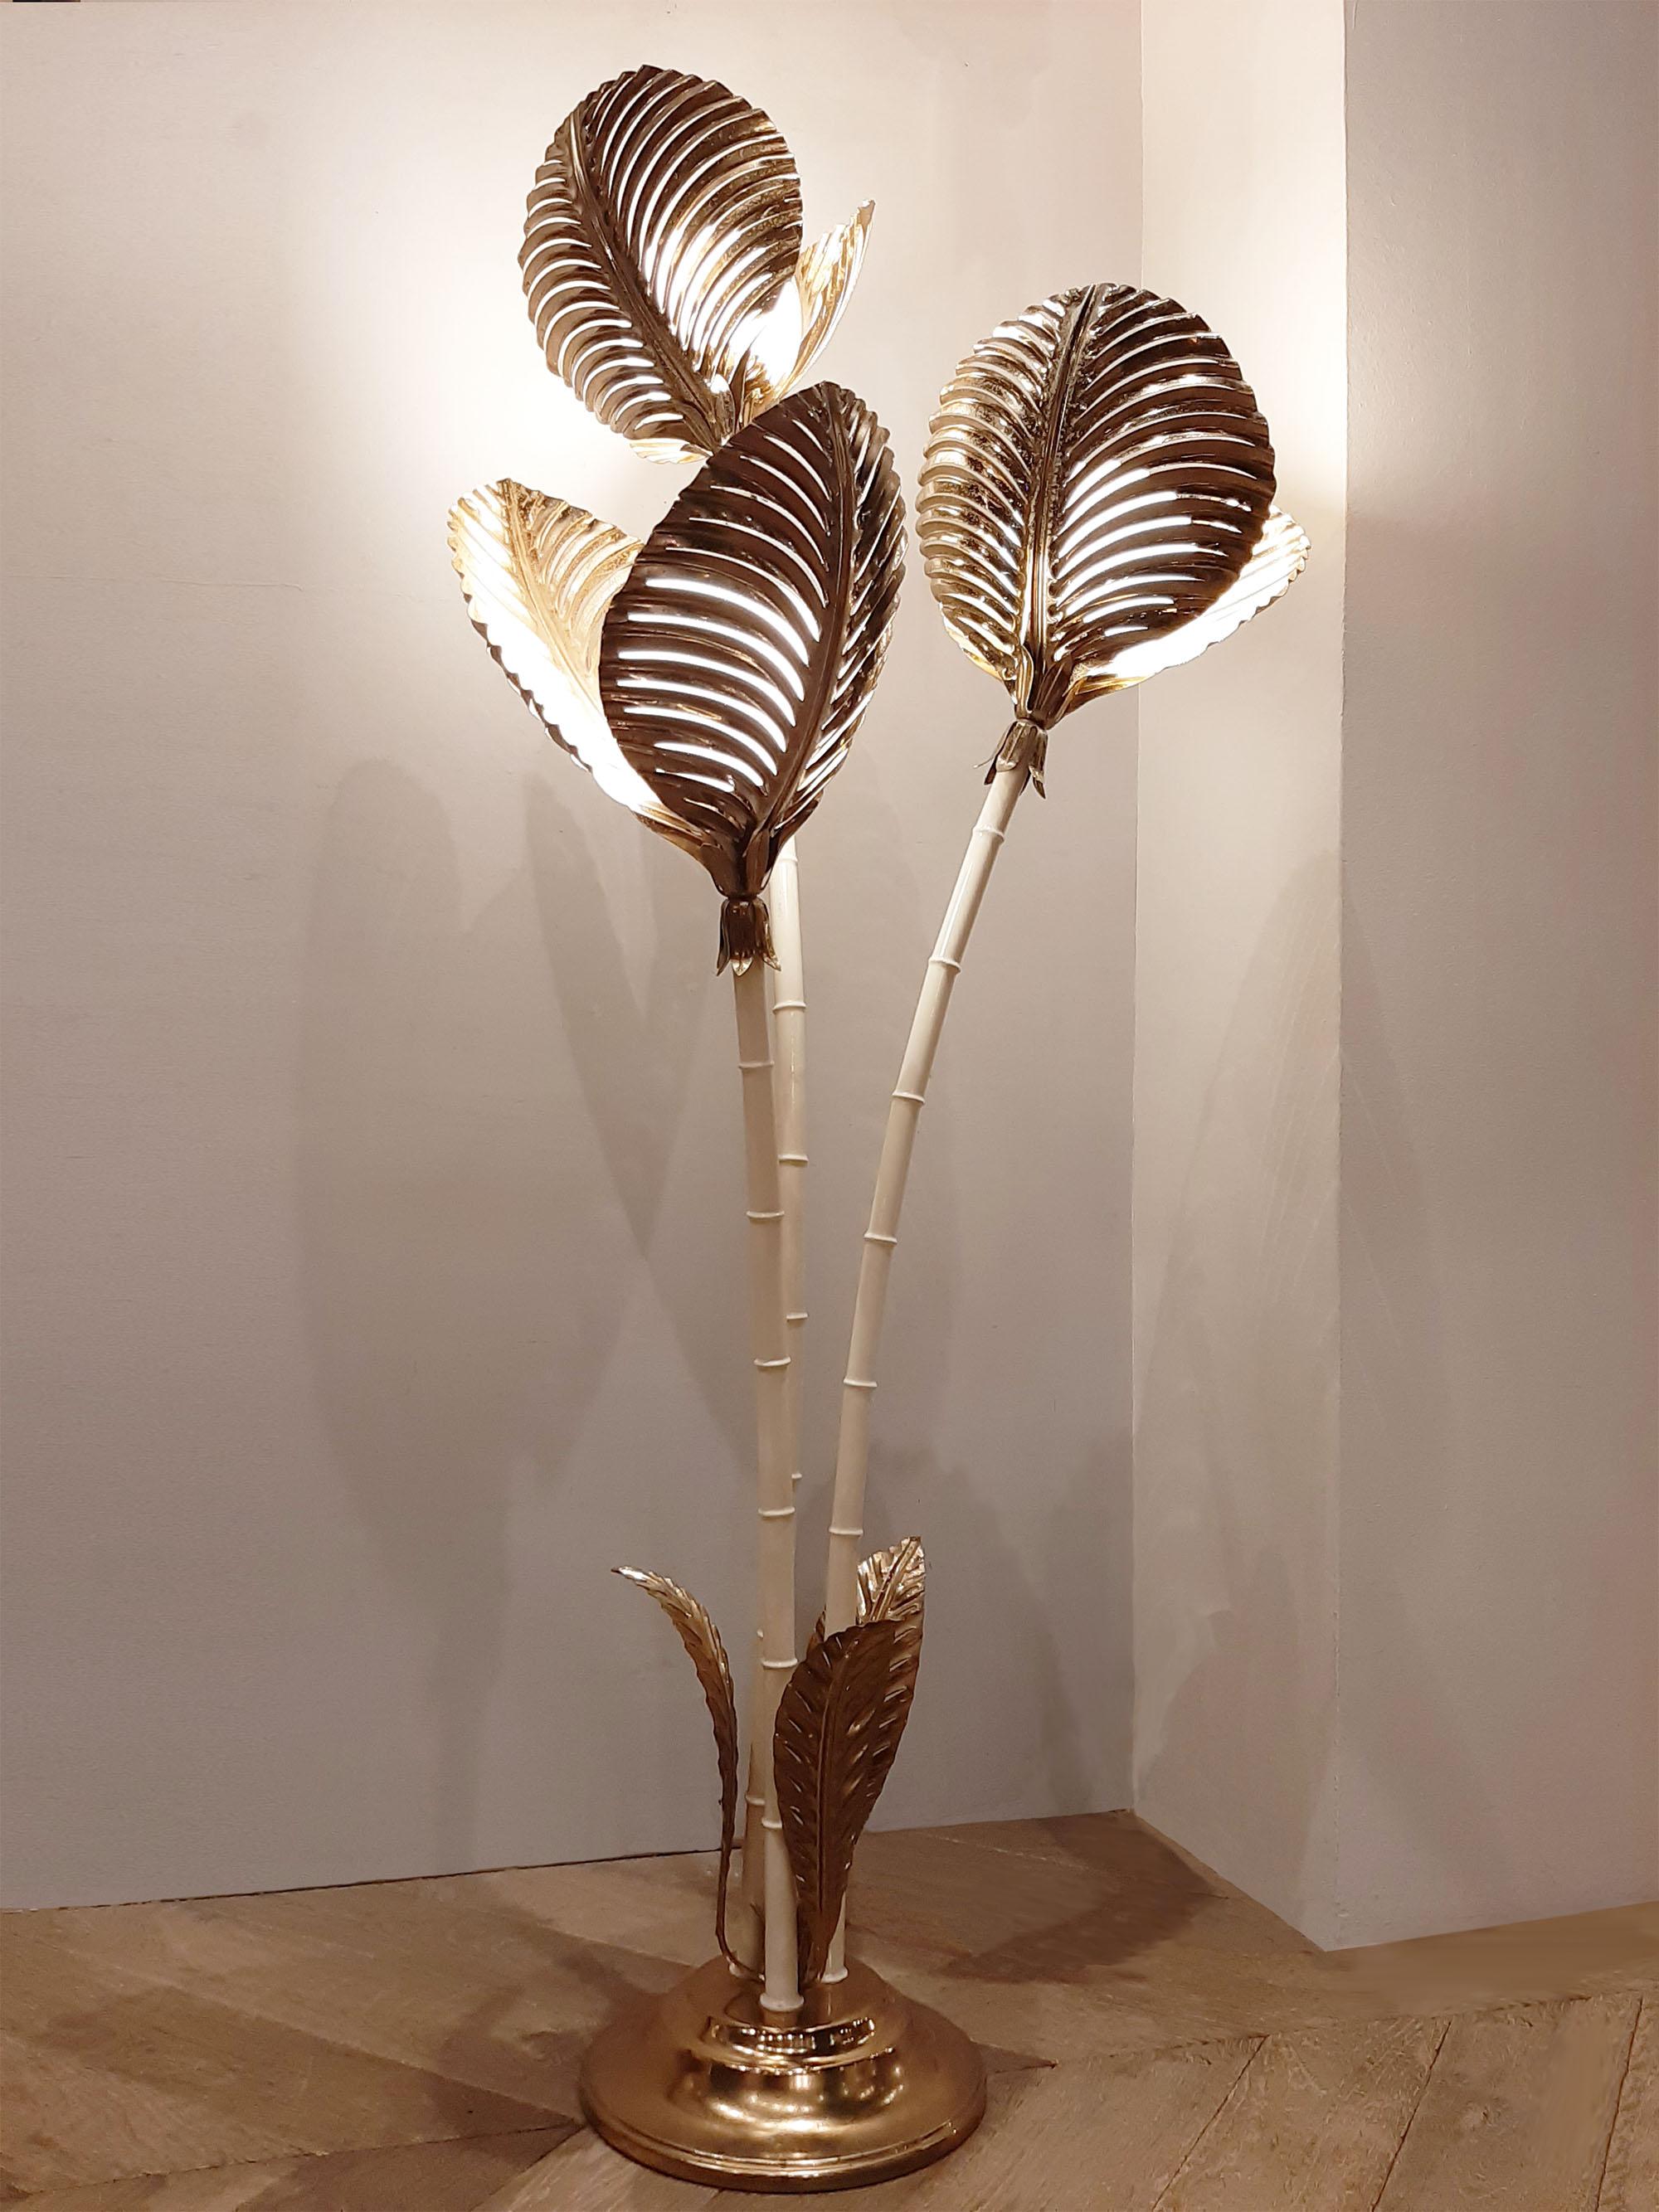 Fabulous brass palm tree floor lamp attributed to Sergio Terzani, 1970s, Florence, Italy.
Crafted from metal, lacquered in white with a glamorous brass finish of the leafs and foot, and 3-light bulbs of matted opaline glass.
This very decorative